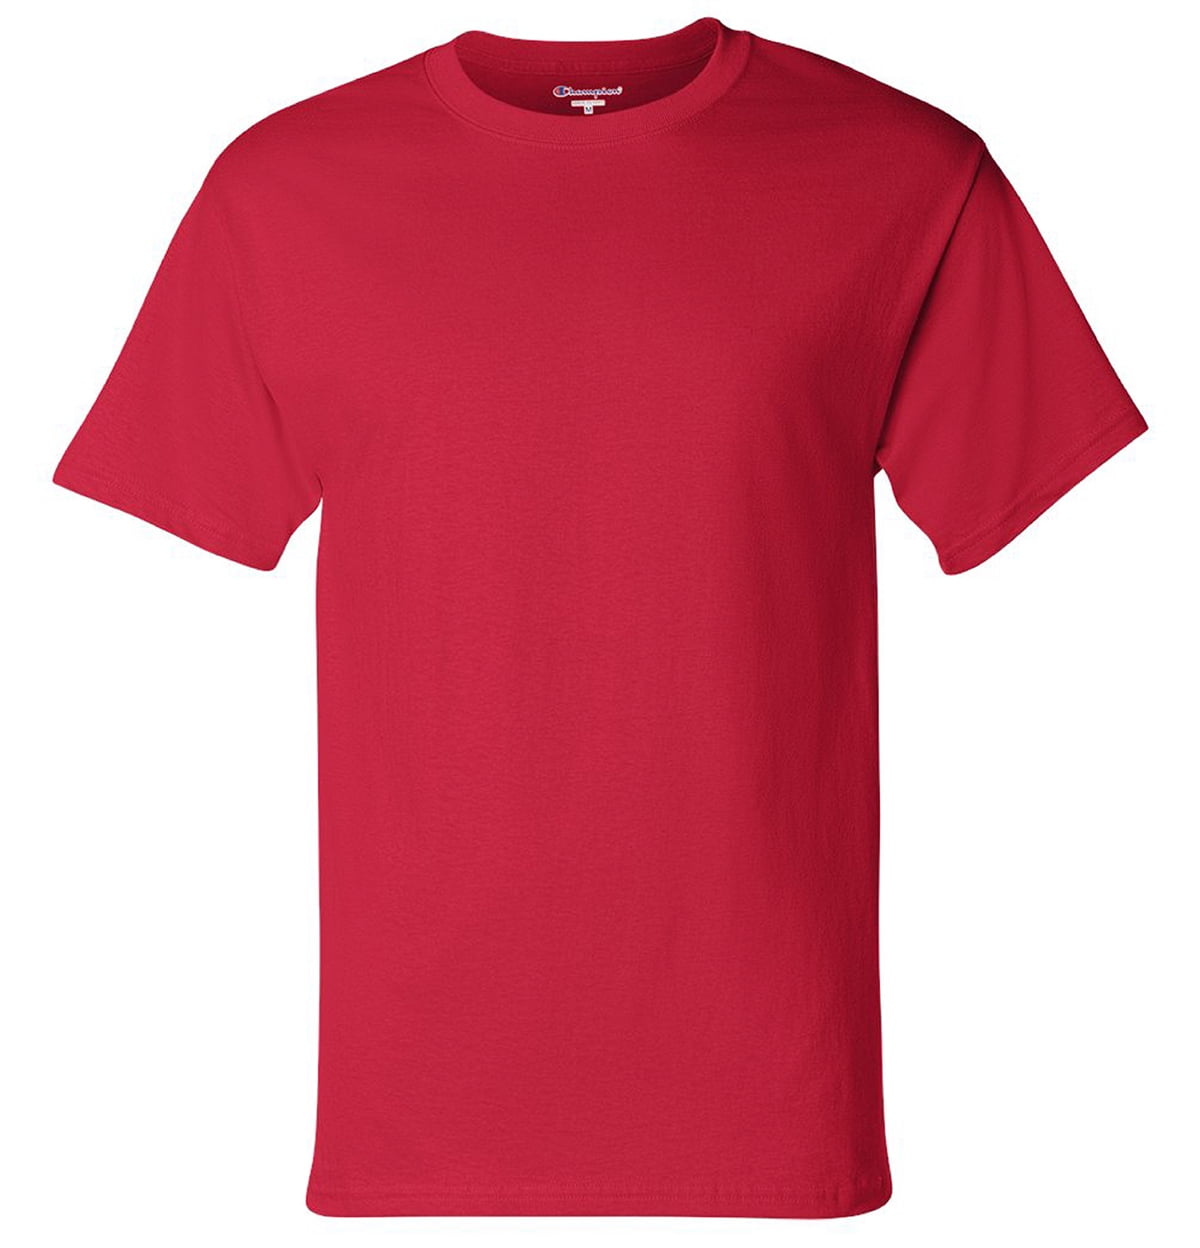 red champion shirt outfit